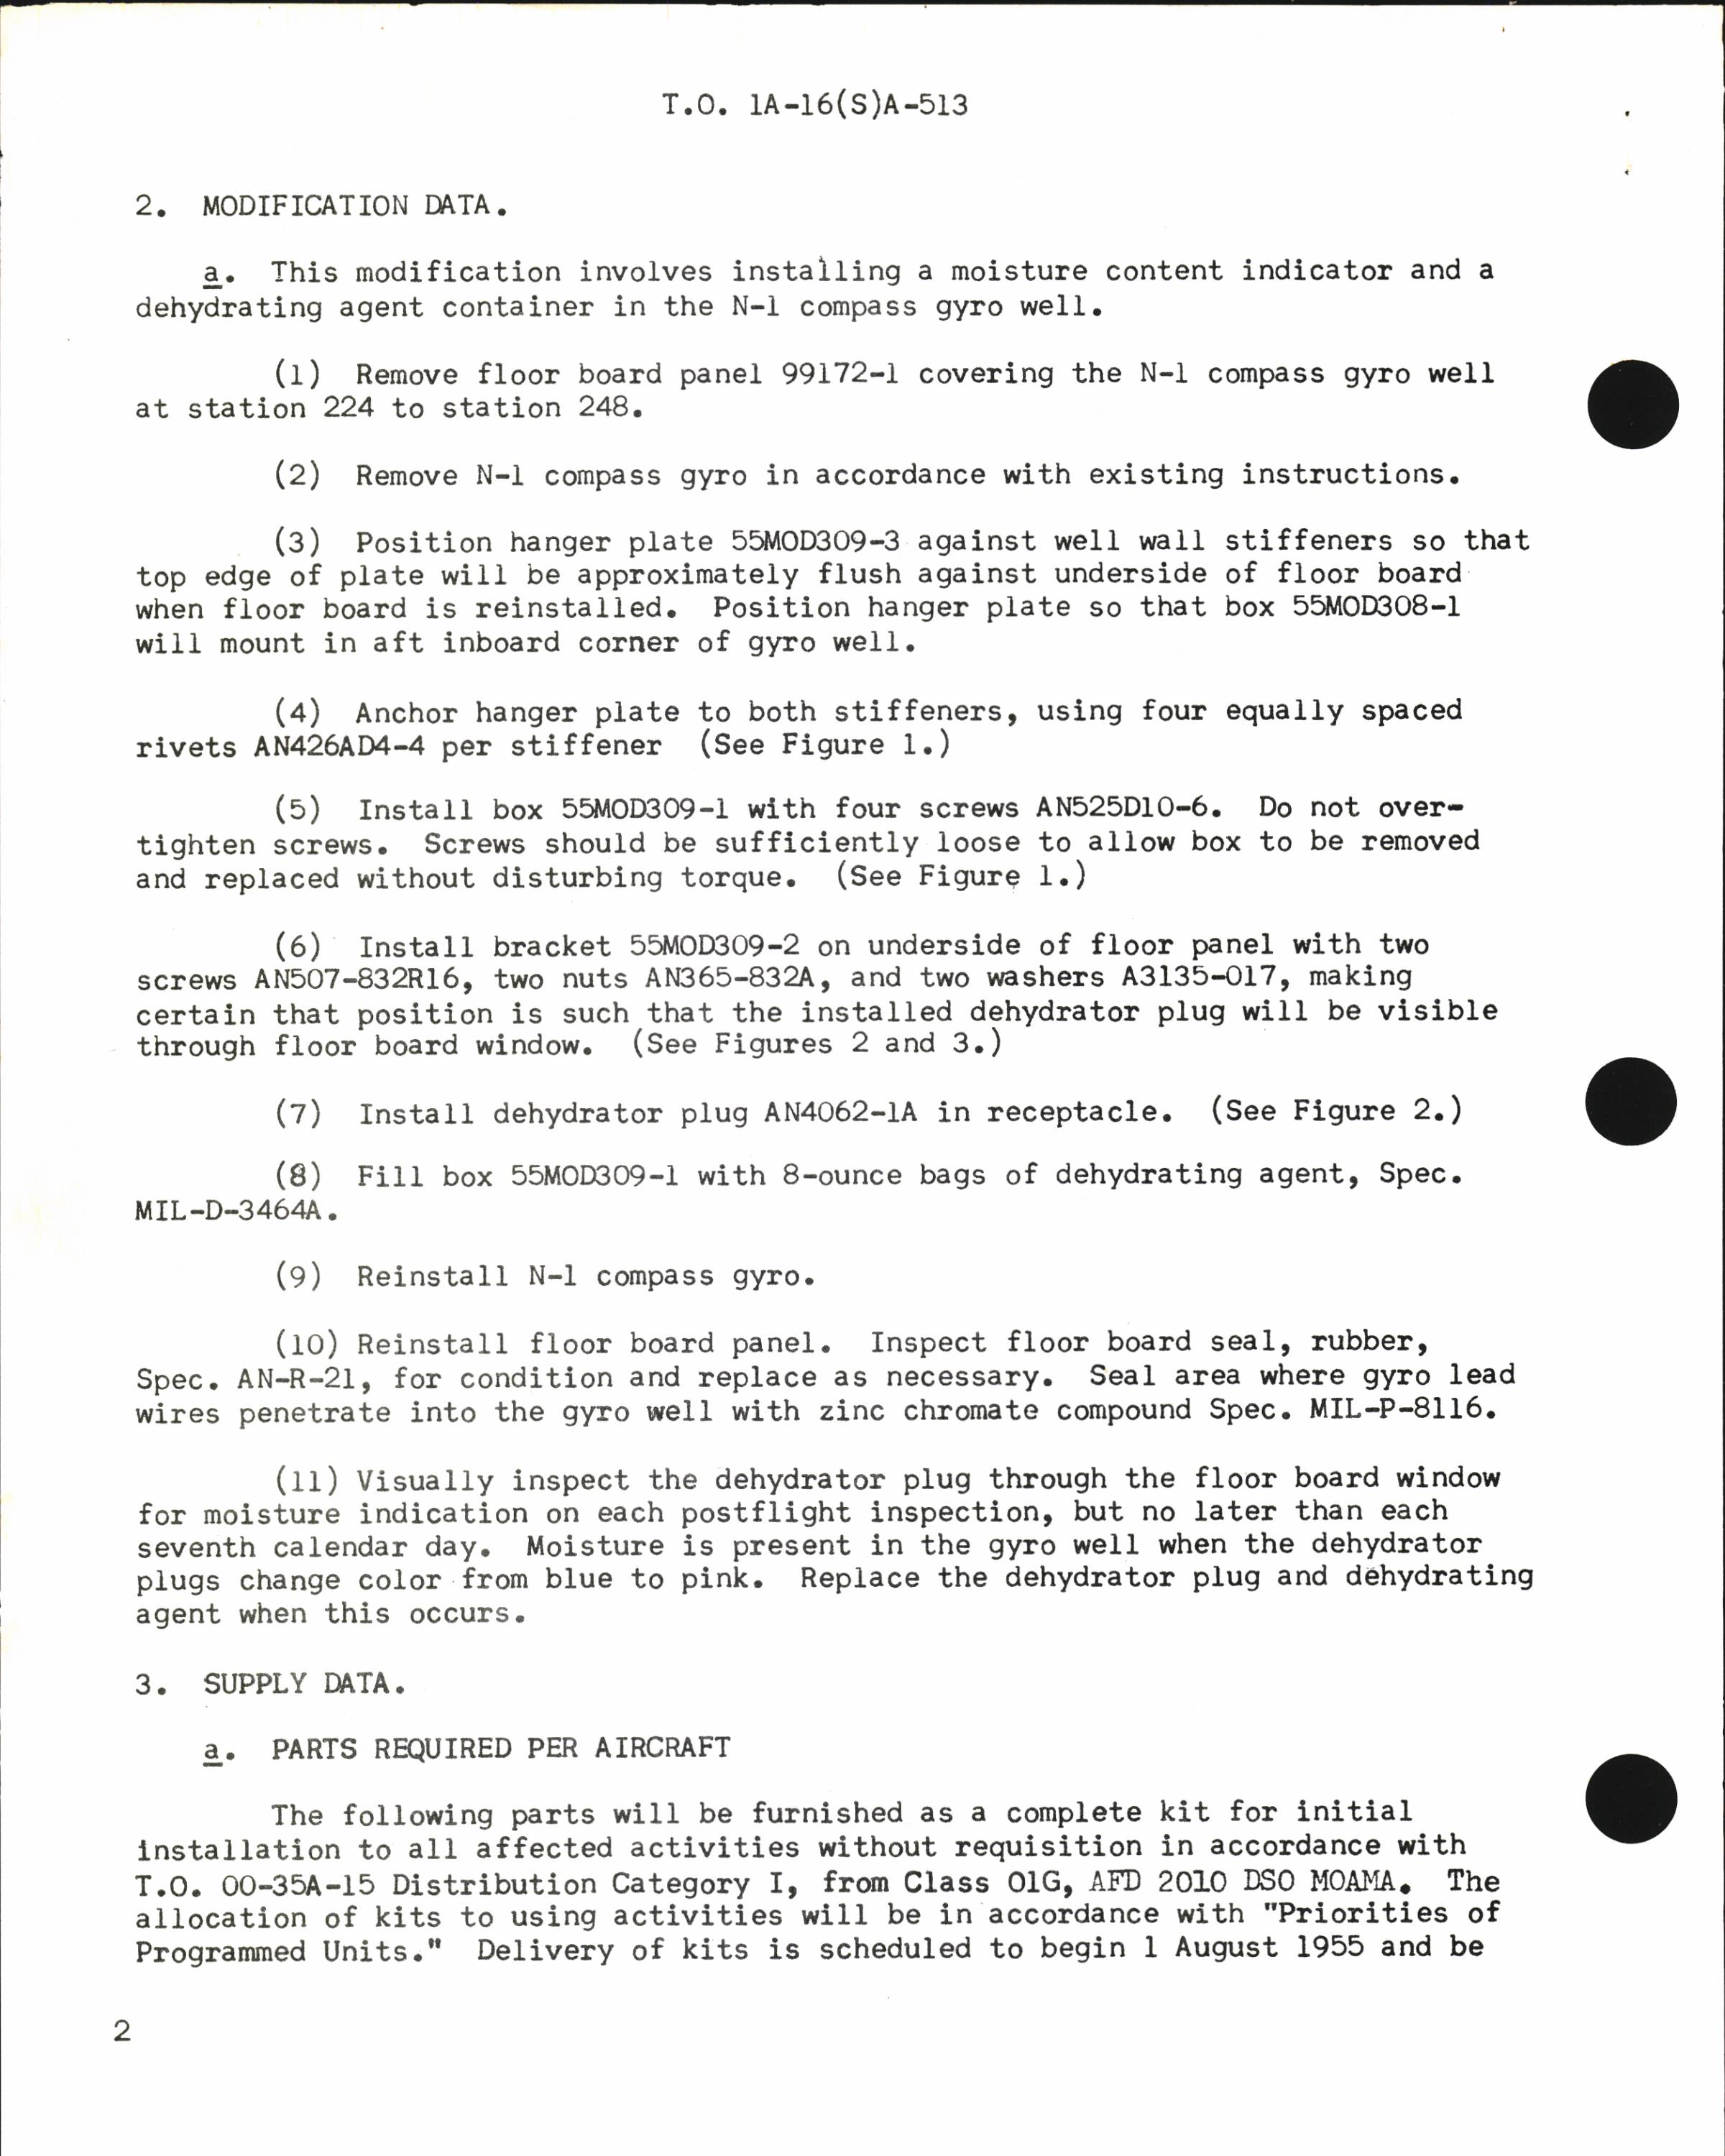 Sample page 2 from AirCorps Library document: installation of Dehydrating Agent in N-1 Compass Gyro Well for SA-16A Aircraft